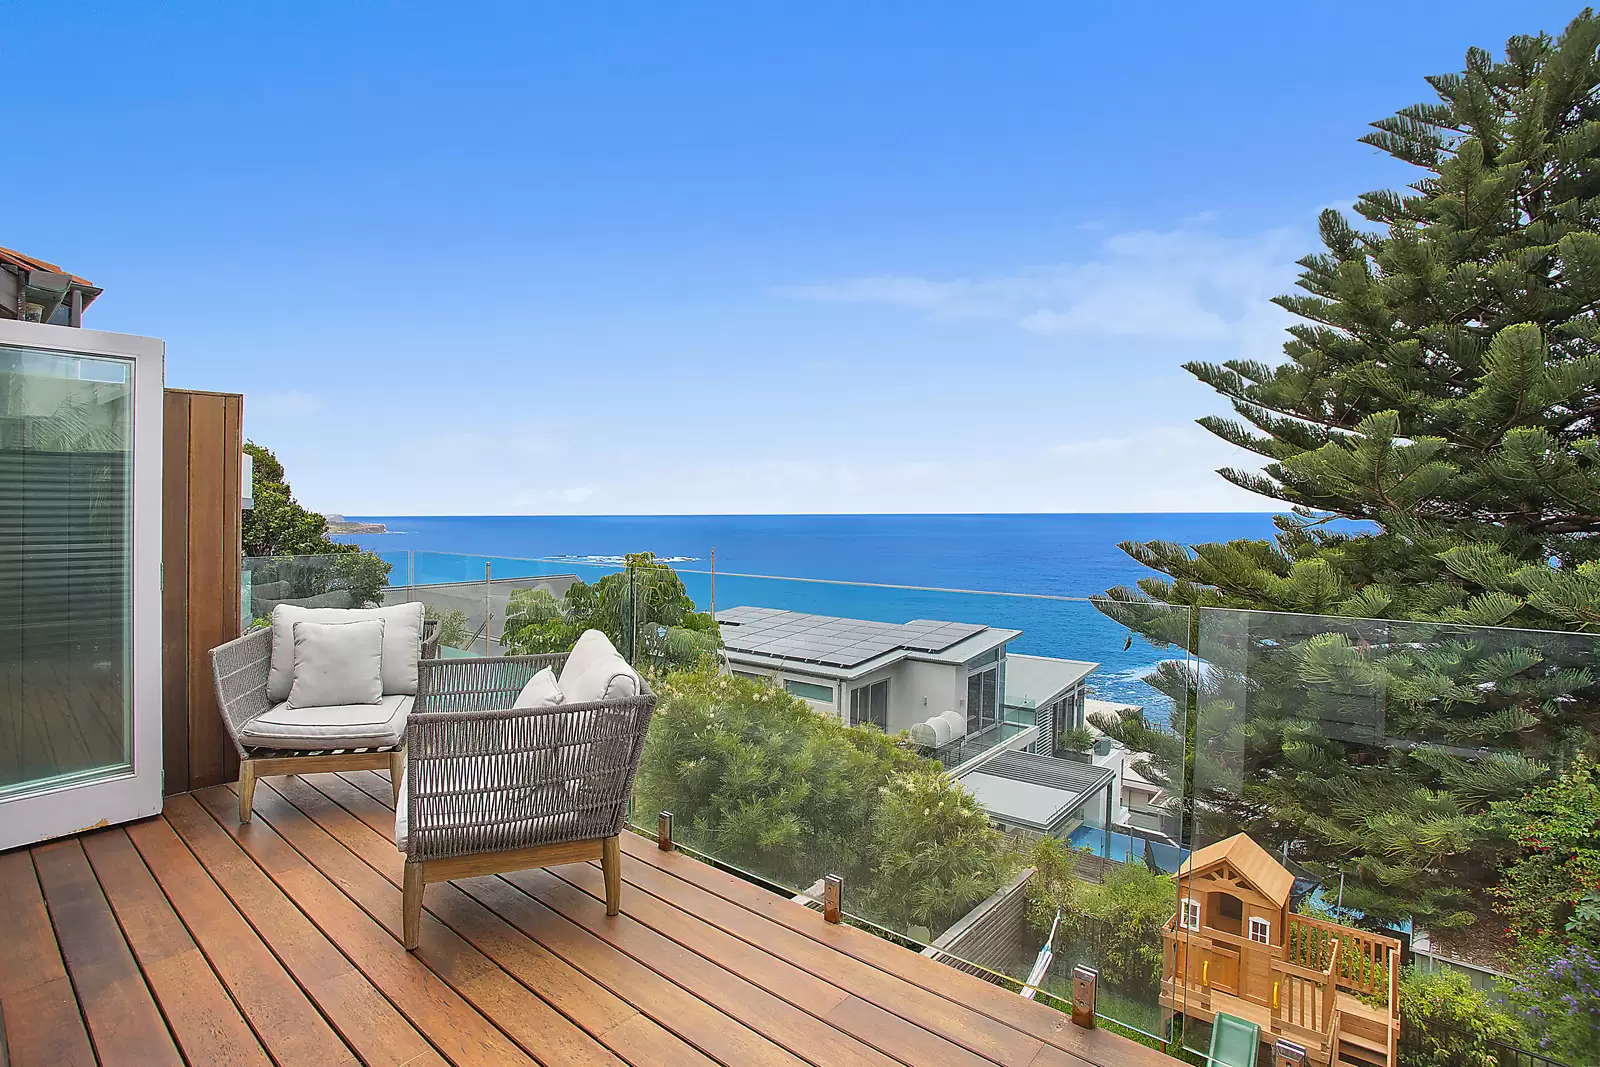 Photo #8: 39 Denning Street, South Coogee - Auction by Sydney Sotheby's International Realty